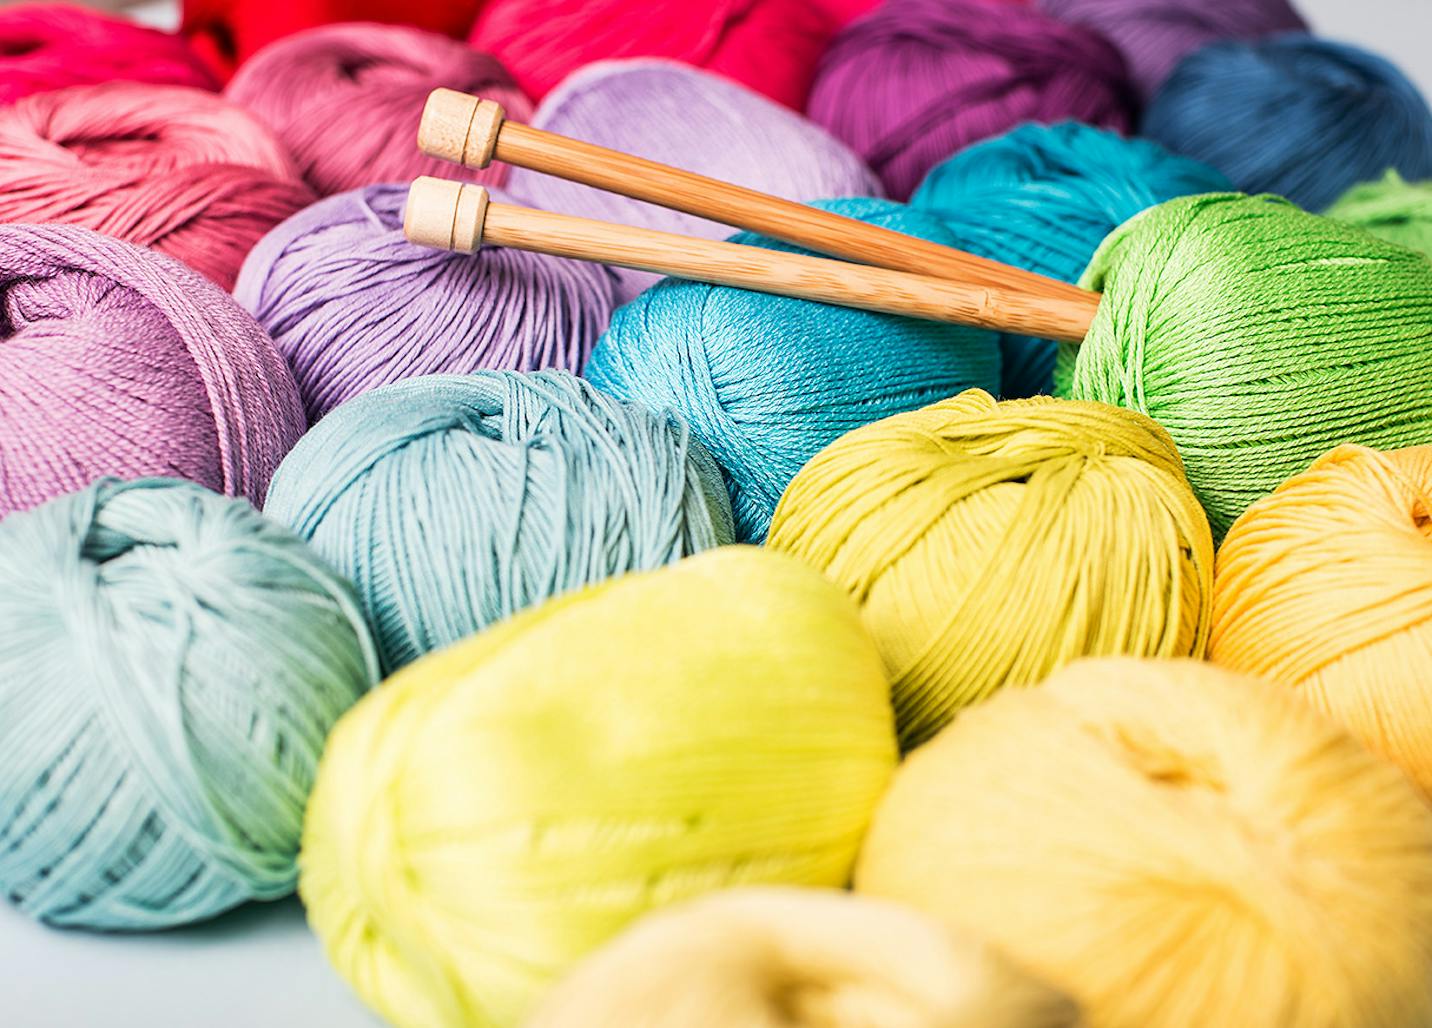 Colorful balls of yarn with knitting needles